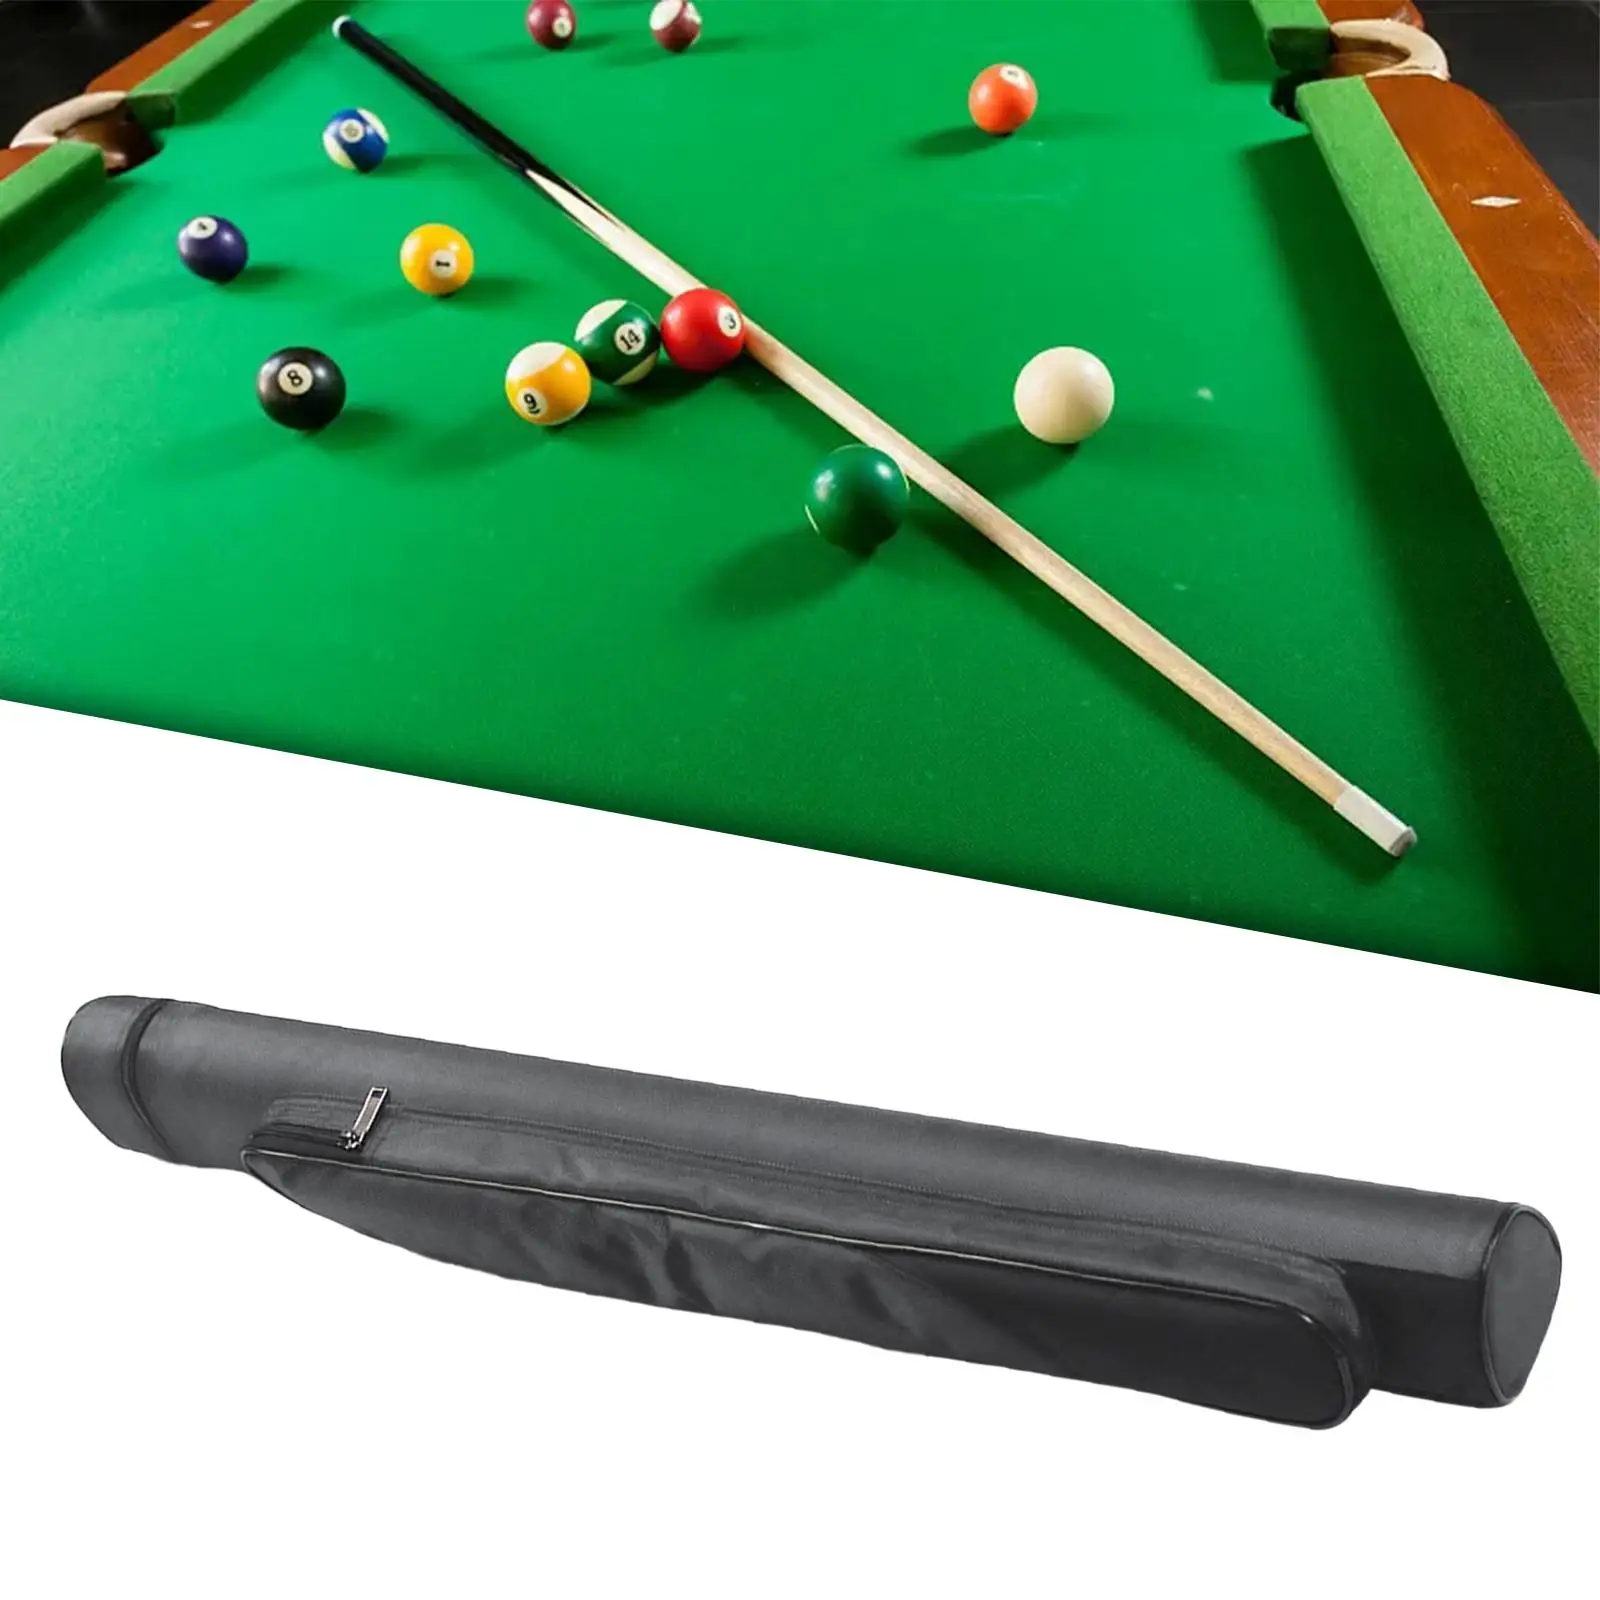 Pool Cue Cases Billiard Pool Cue Carrying Bag, with Adjustable Shoulder Strap